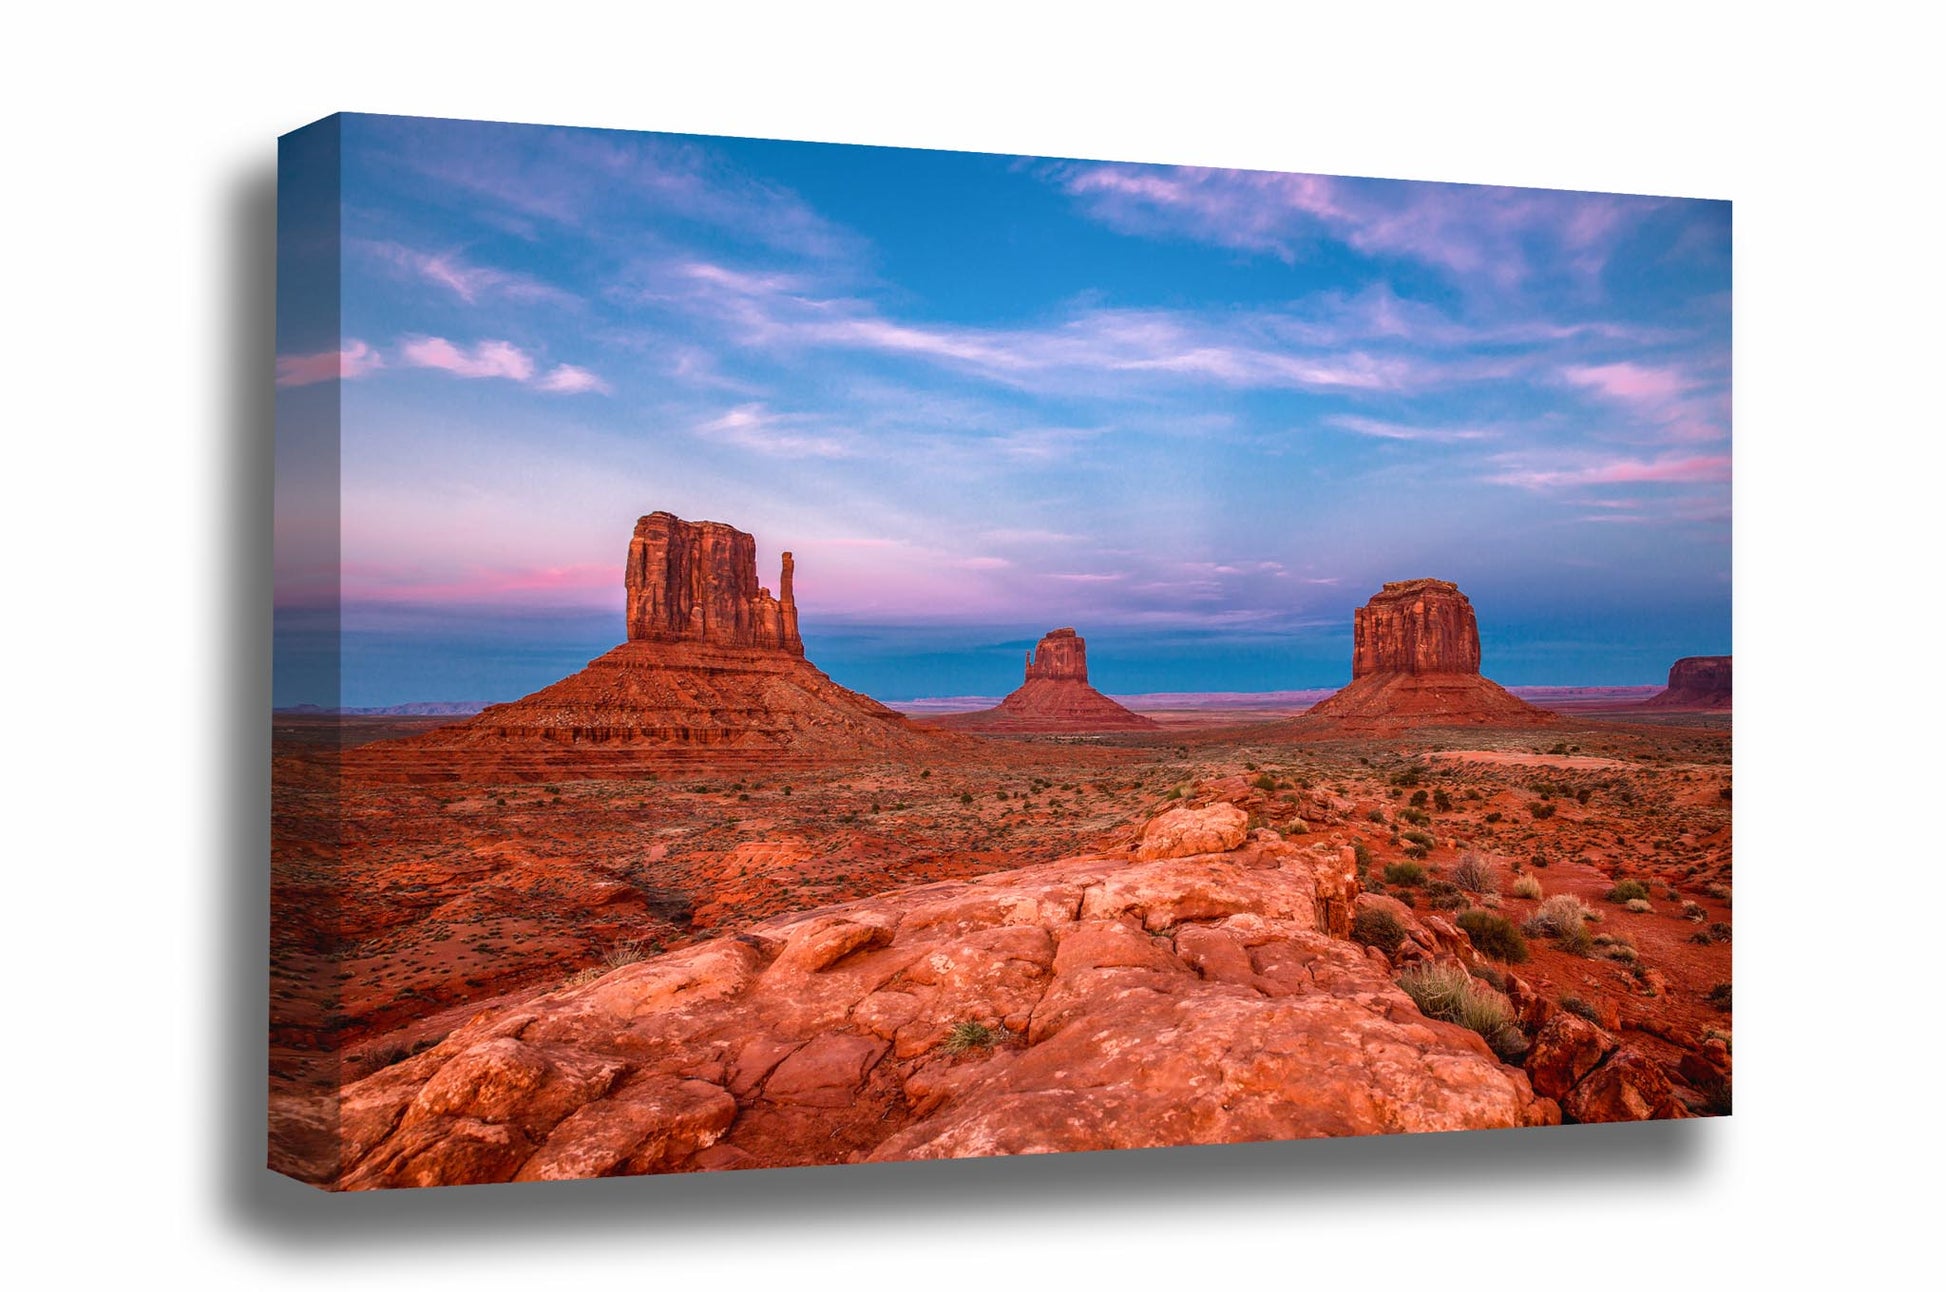 Western landscape canvas wall art of Monument Valley at sunset along the Arizona and Utah state line by Sean Ramsey of Southern Plains Photography.